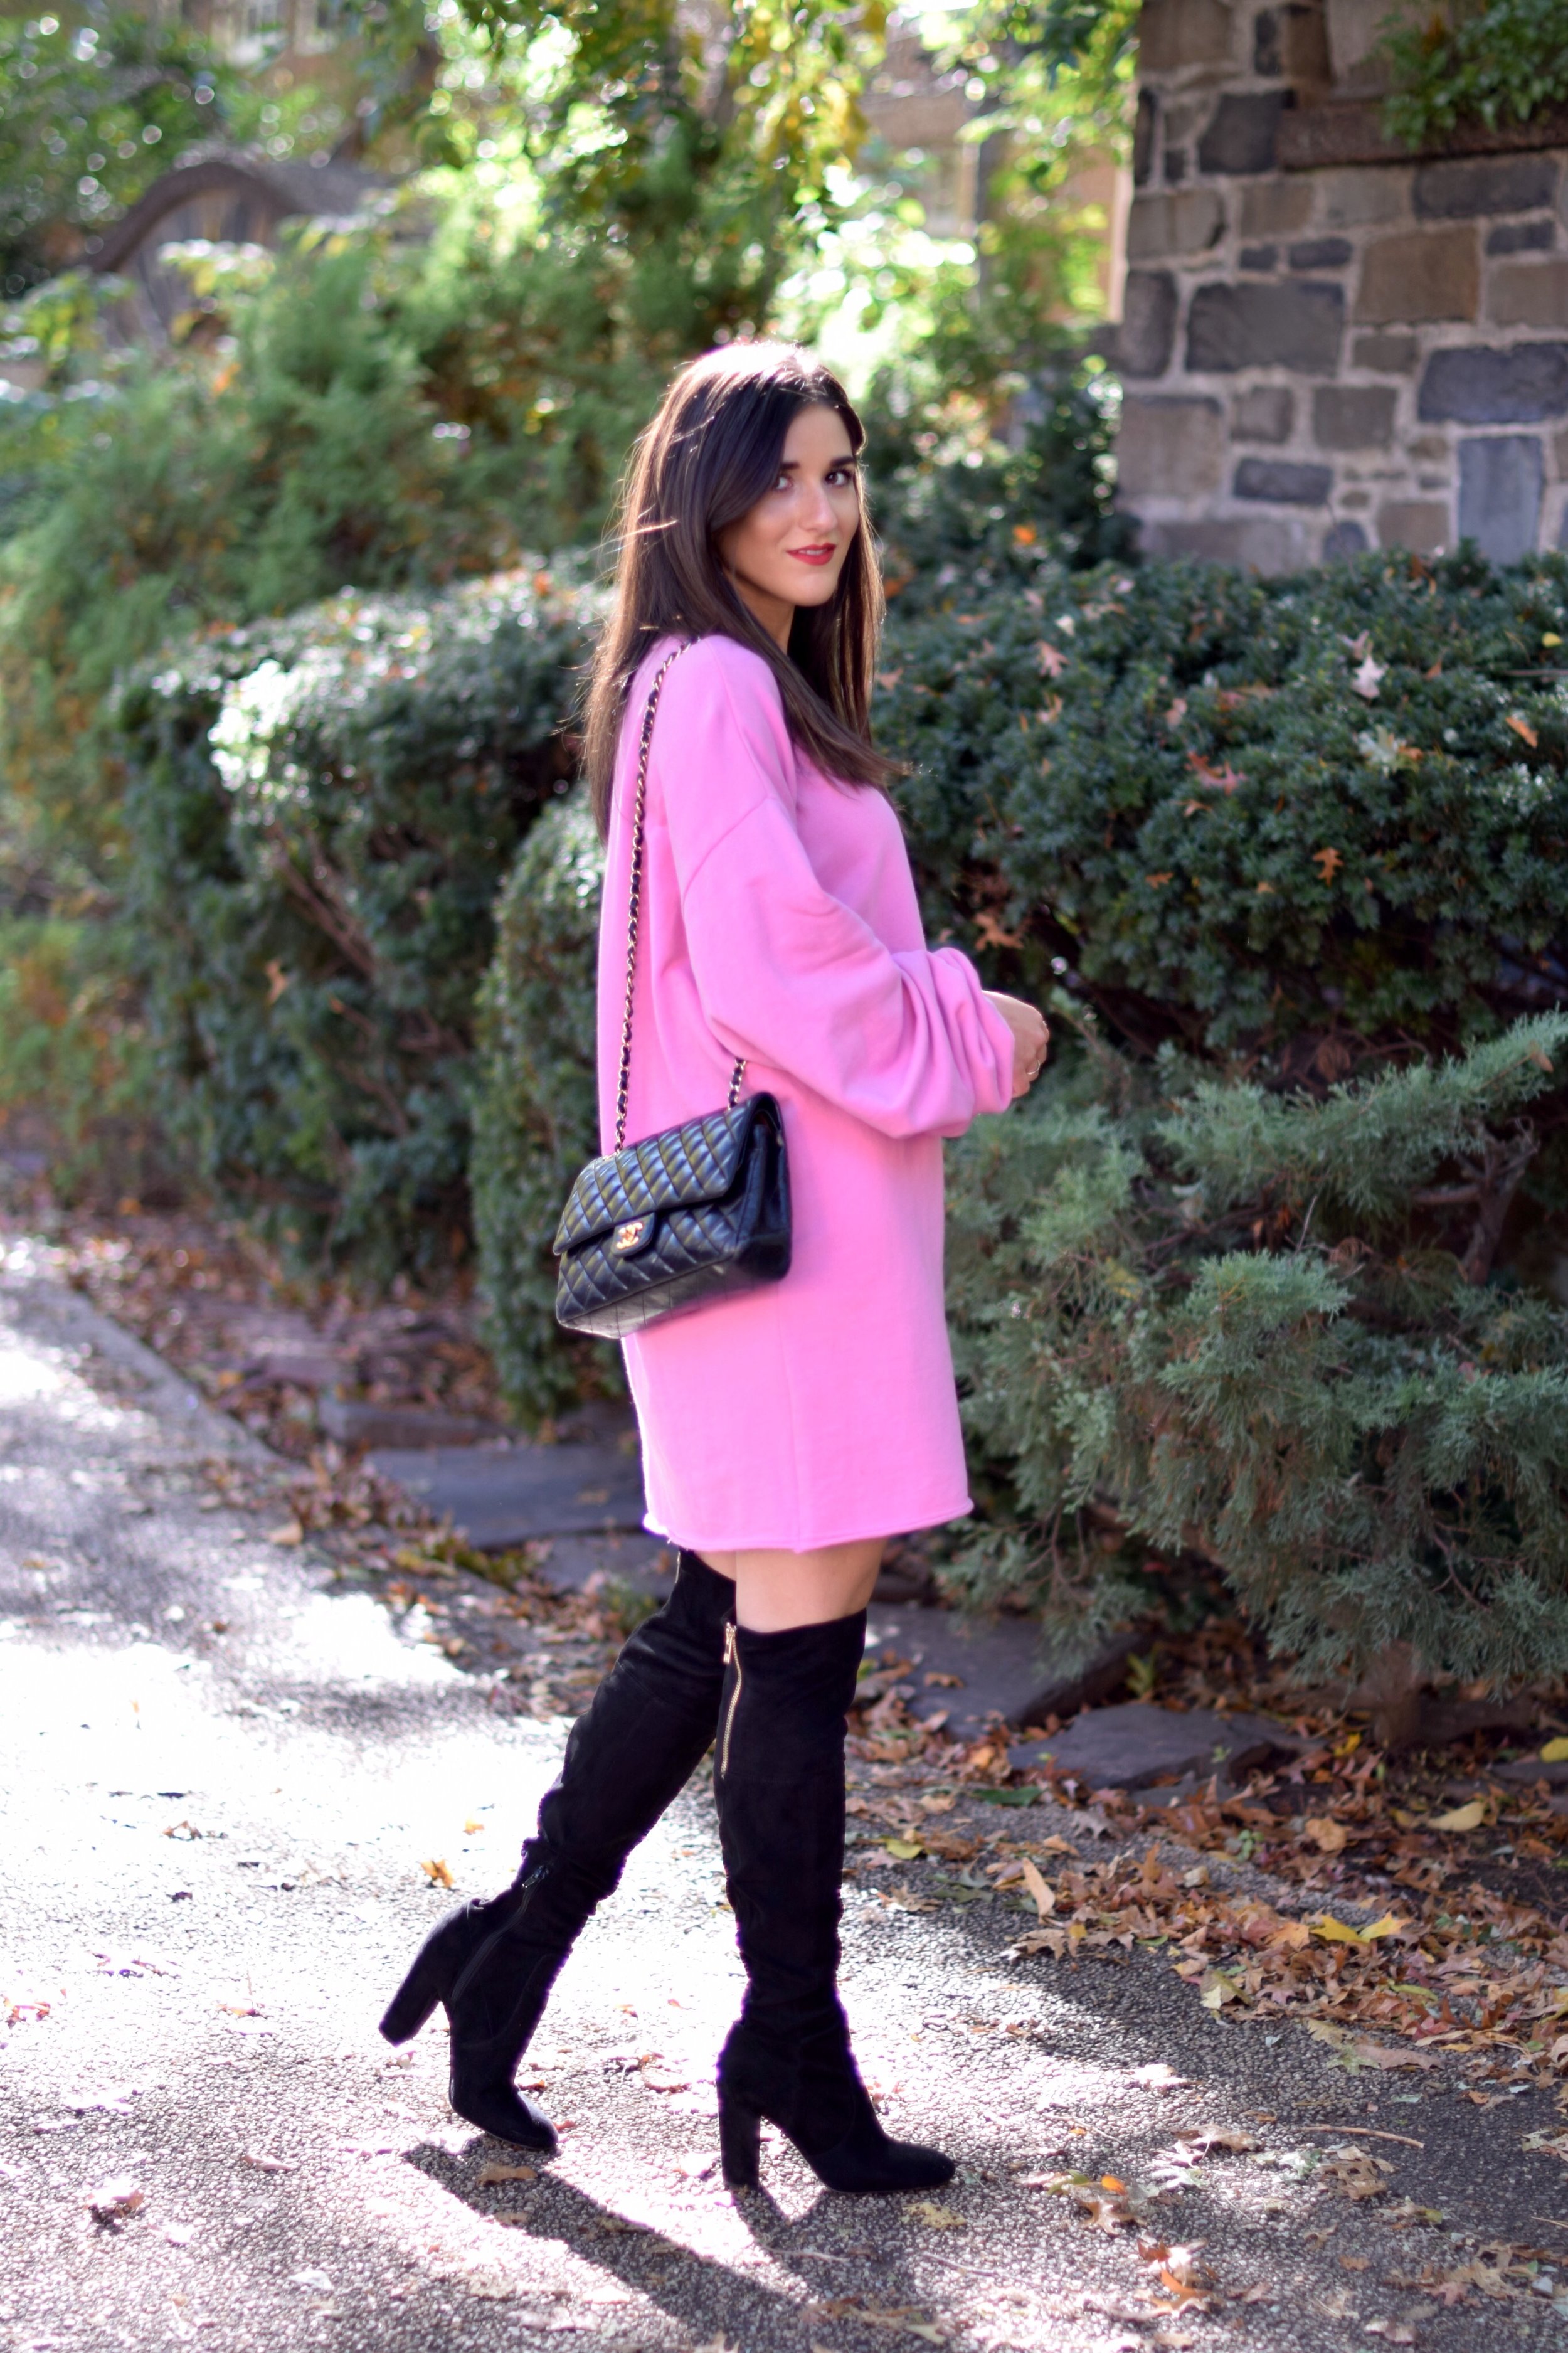 Pink Sweatshirt Dress Black OTK Boots Blogging Before The Days Of Instagram Esther Santer Fashion Blog NYC Street Style Blogger Outfit OOTD Trendy Over The Knee Hair Girl Women New York Chanel Bag Designer ASOS Pretty Shopping Sale Beautiful Winter.jpg